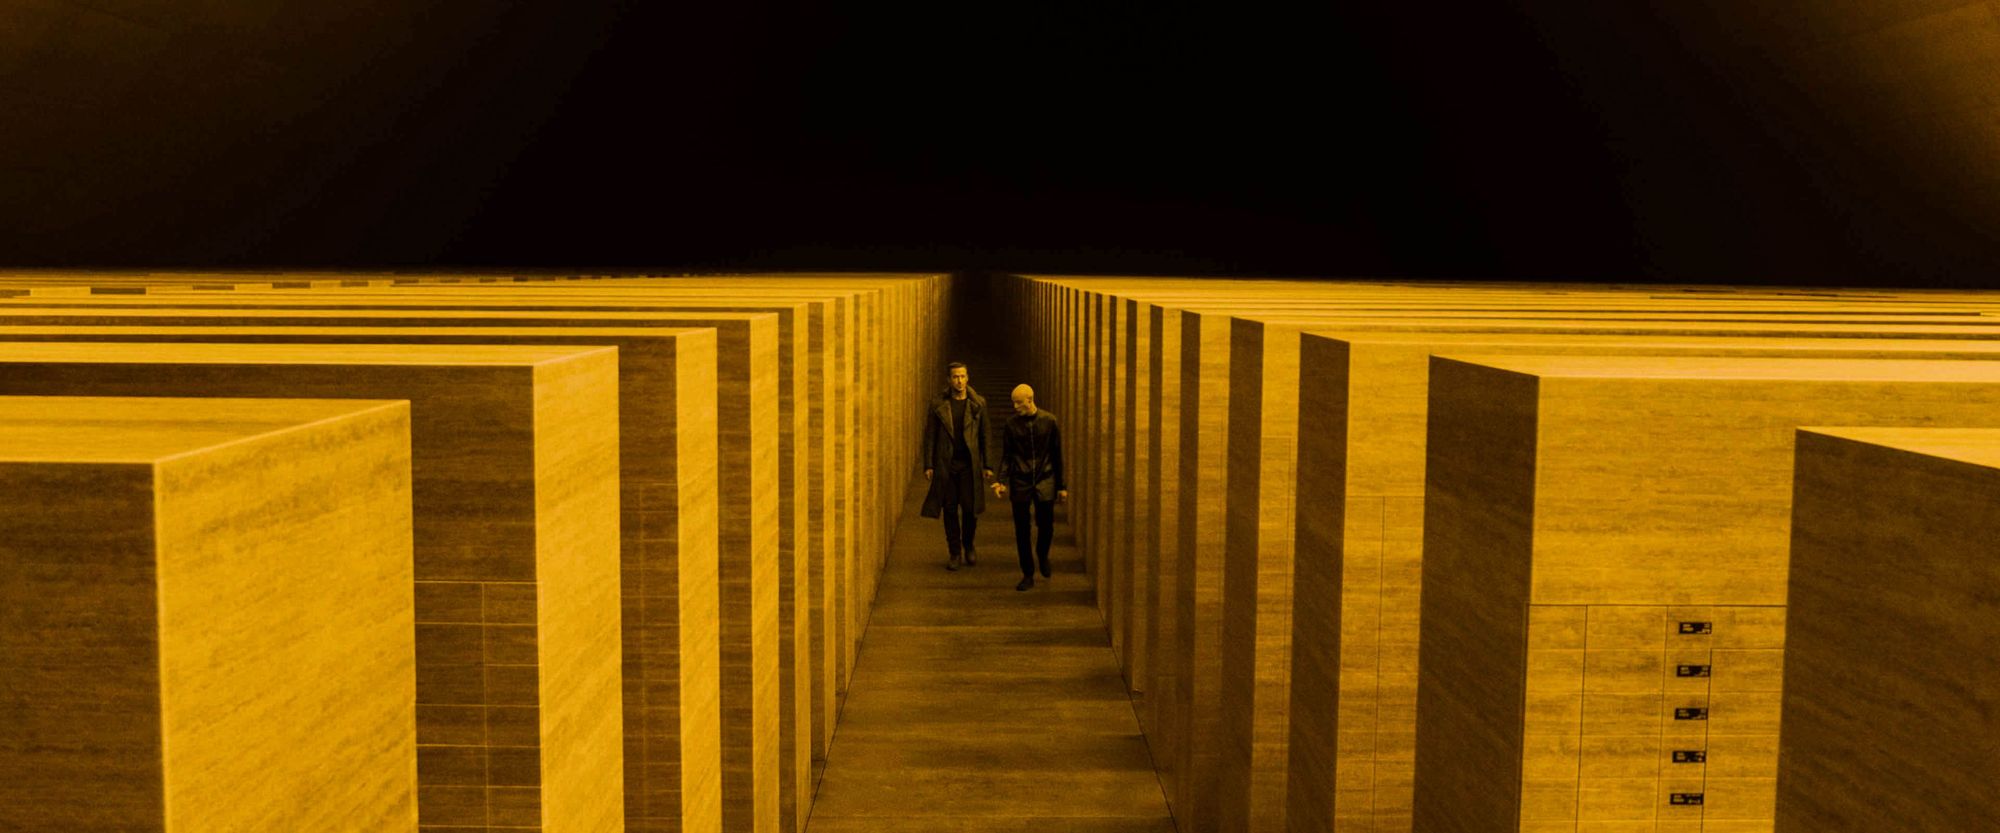 Two men walking along stone cubes covered in yellow light